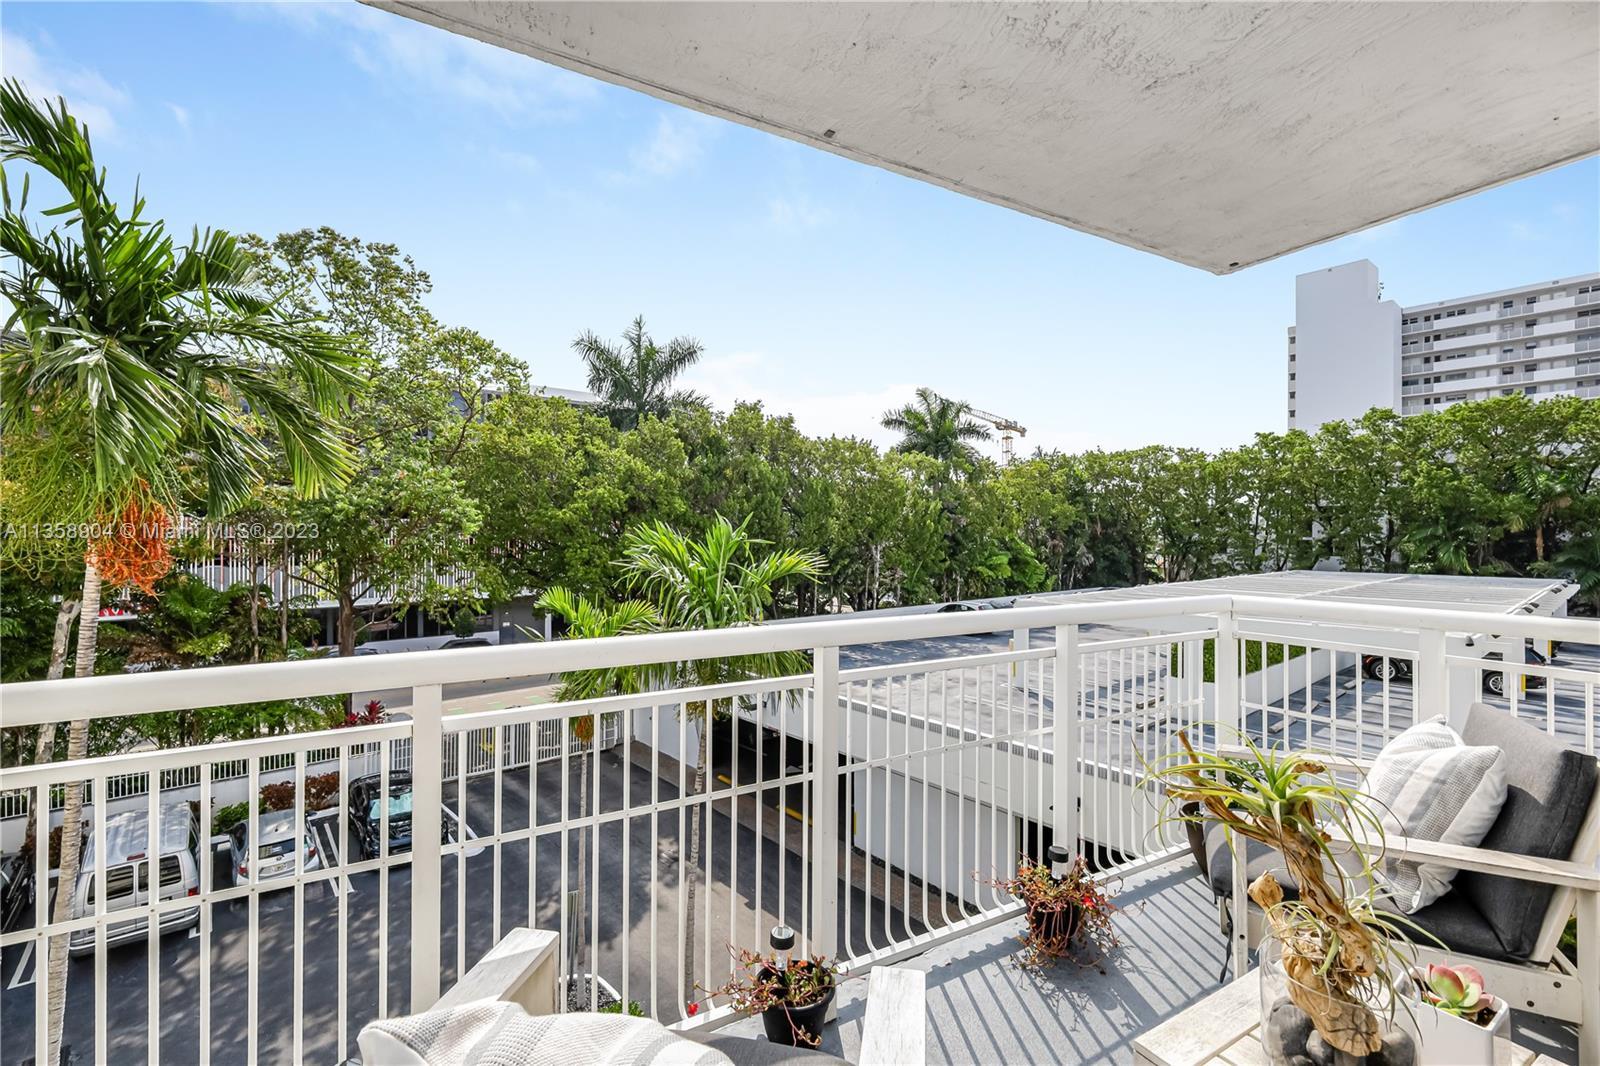 Looking for the perfect home in Miami Beach? This stunning apartment offers luxurious living in the 